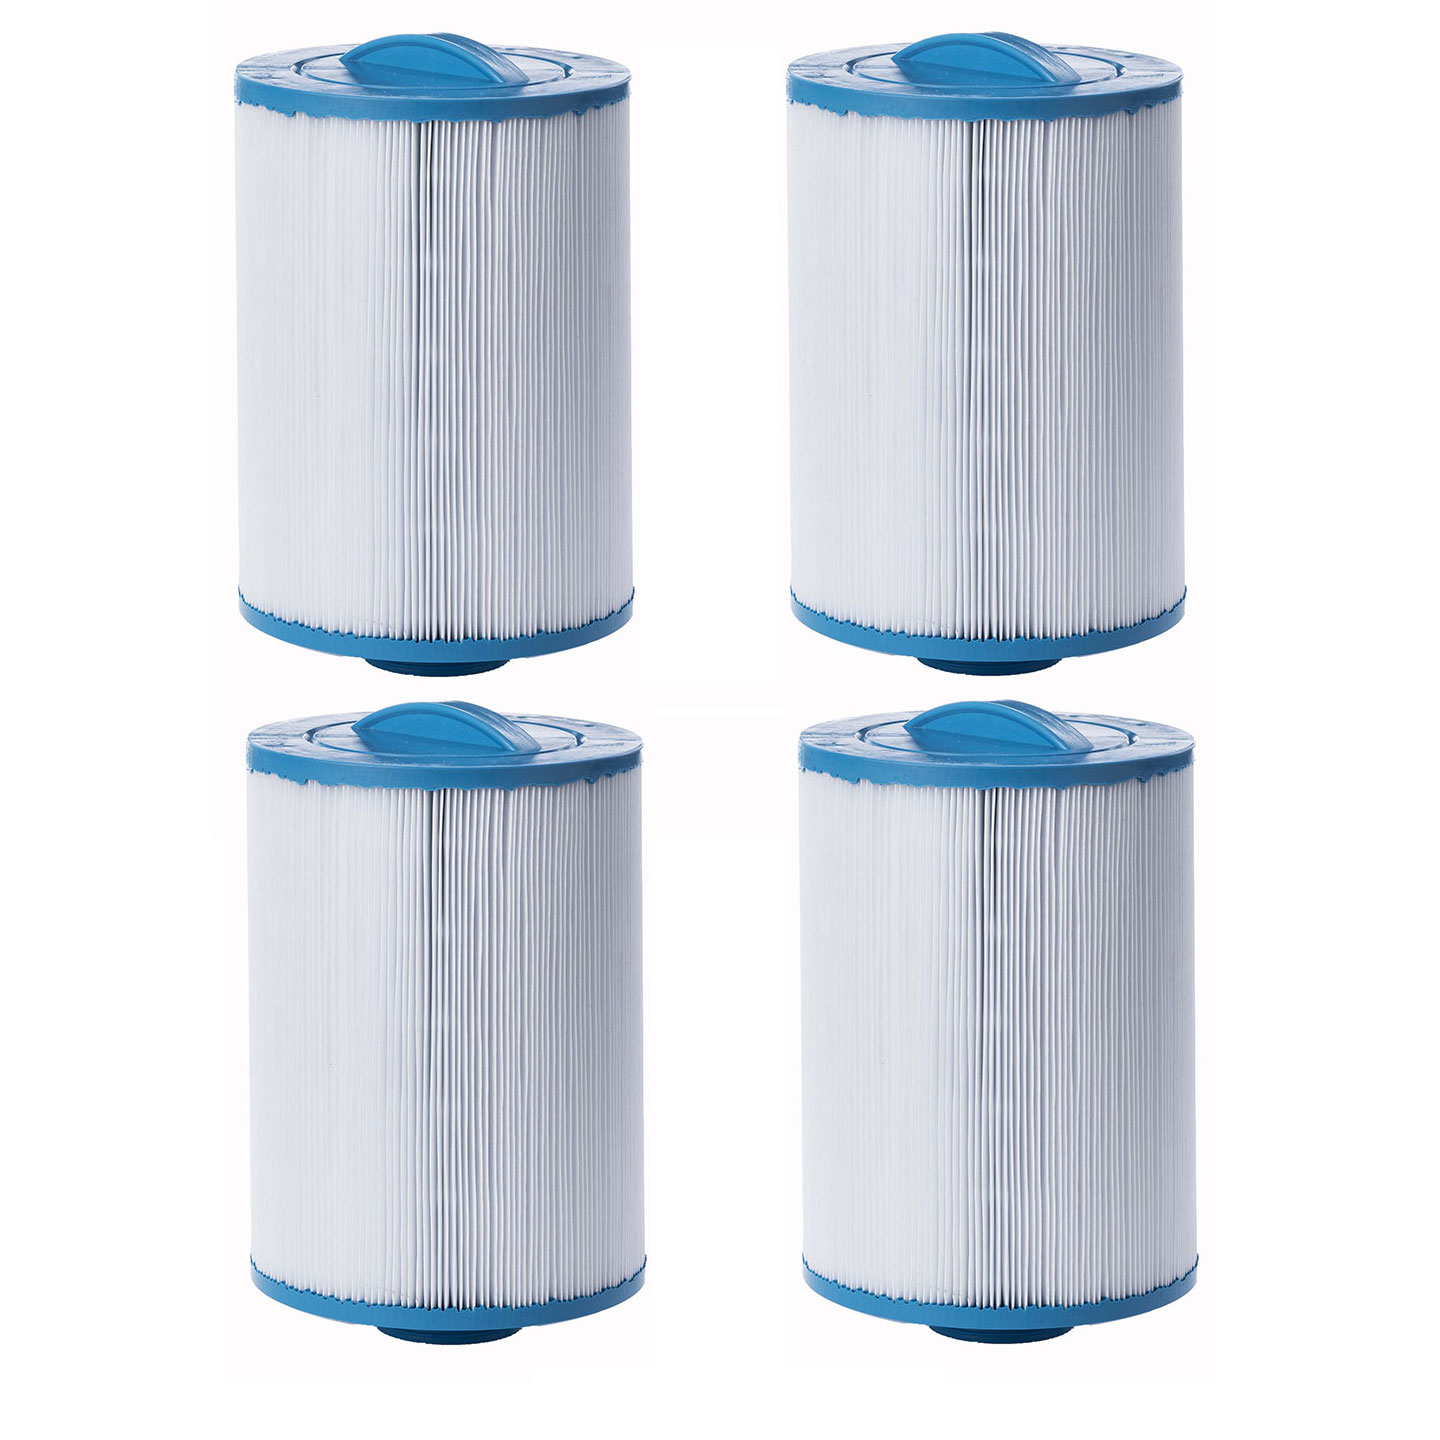 ClearChoice Replacement Pool & Spa Filter for Unicel 6CH-352, 4-pack